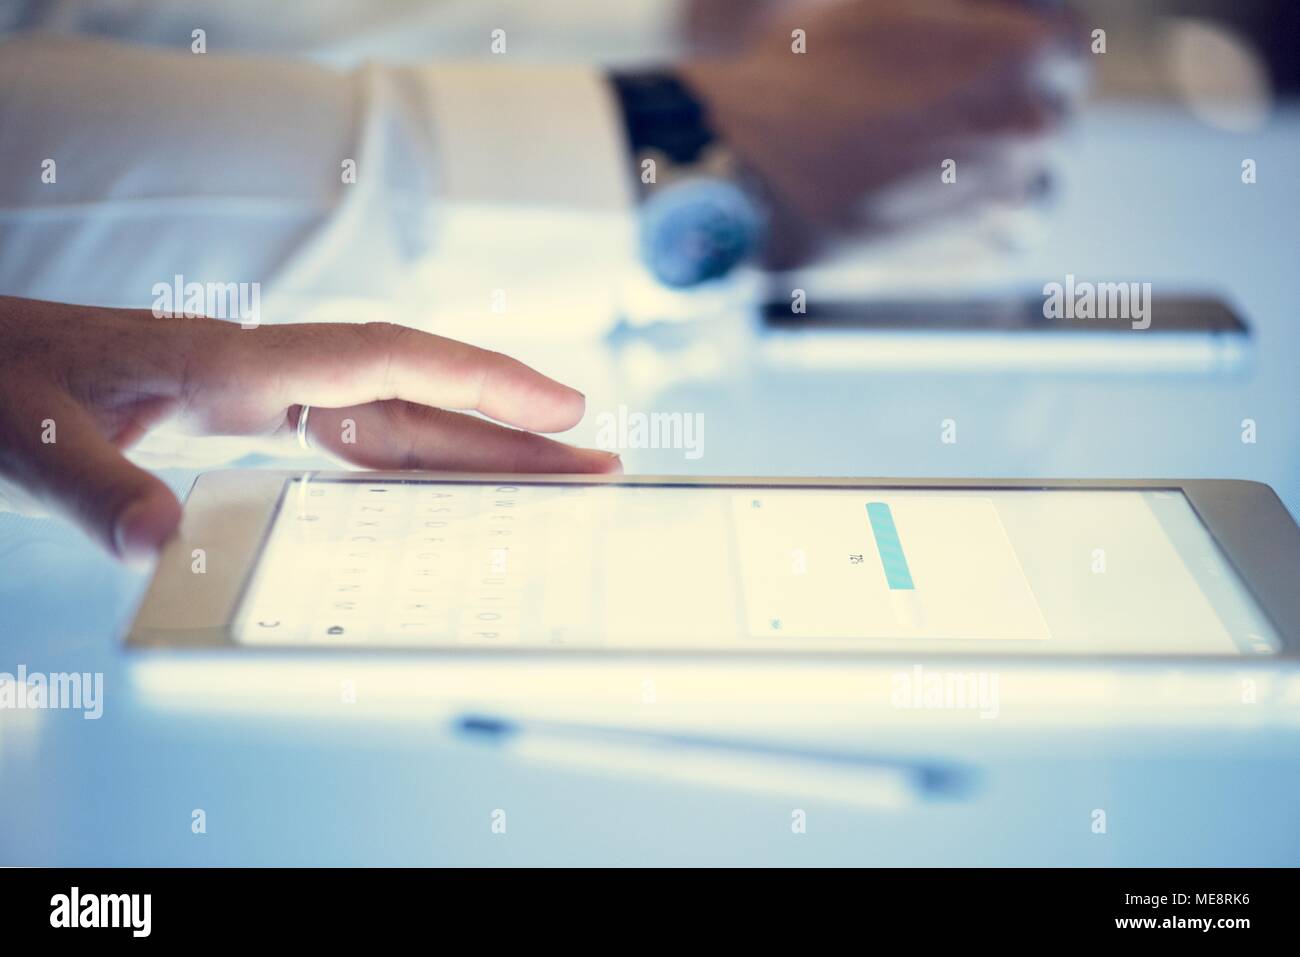 Hand on a digital tablet with downloading on a screen Stock Photo